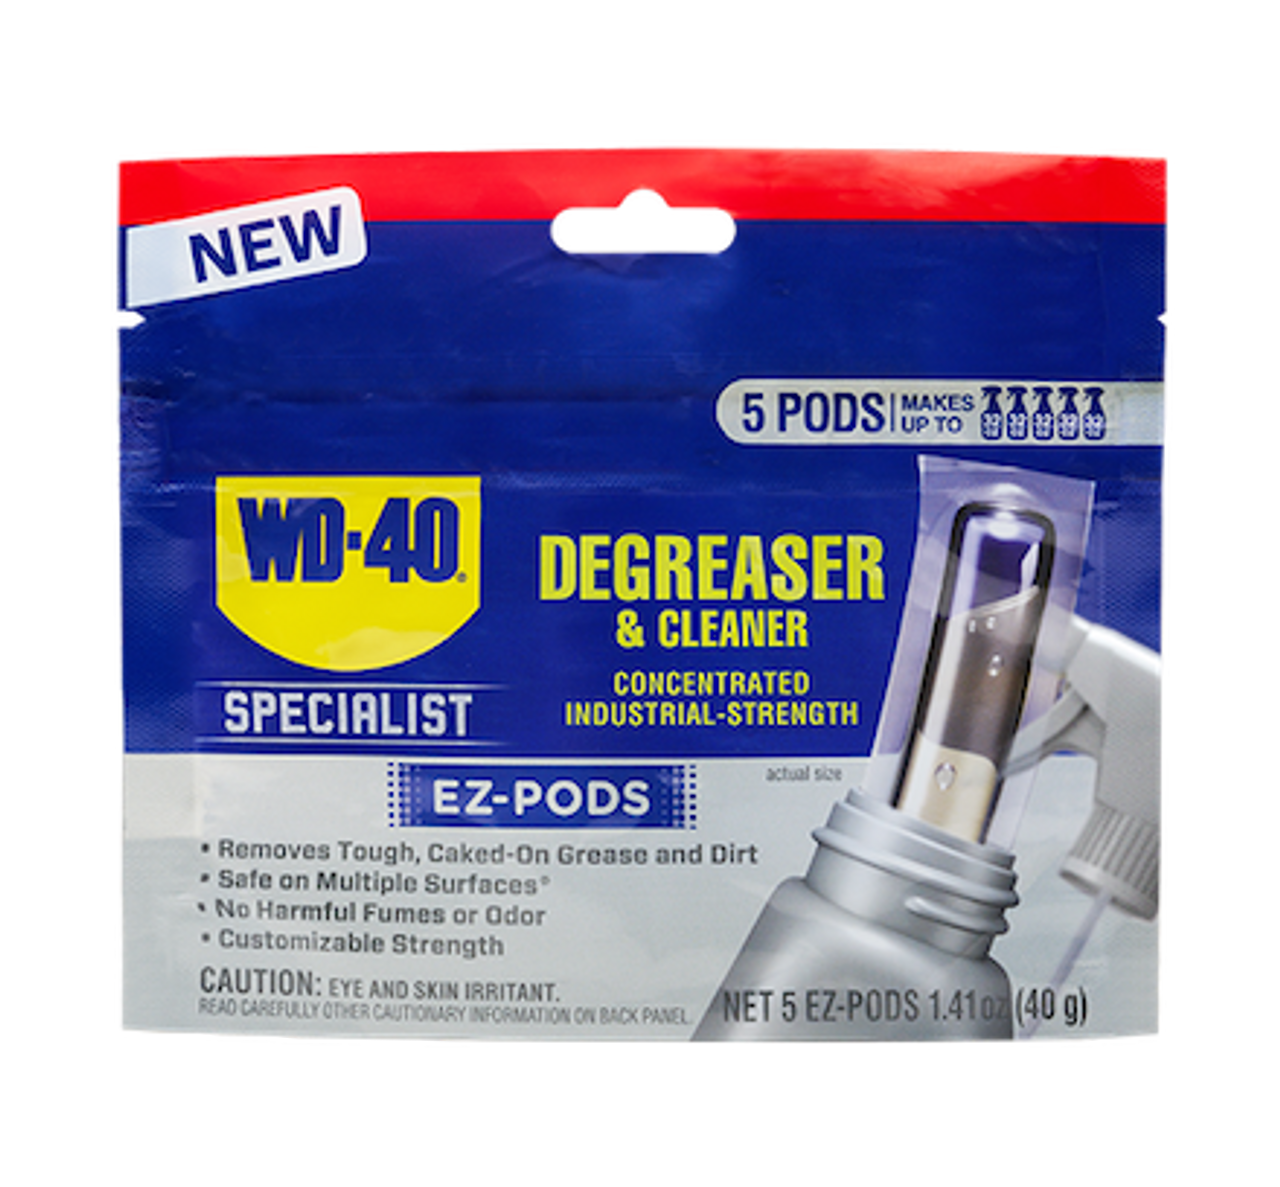 Purple Power Concentrated Industrial Cleaner/Degreaser - Pack of 5